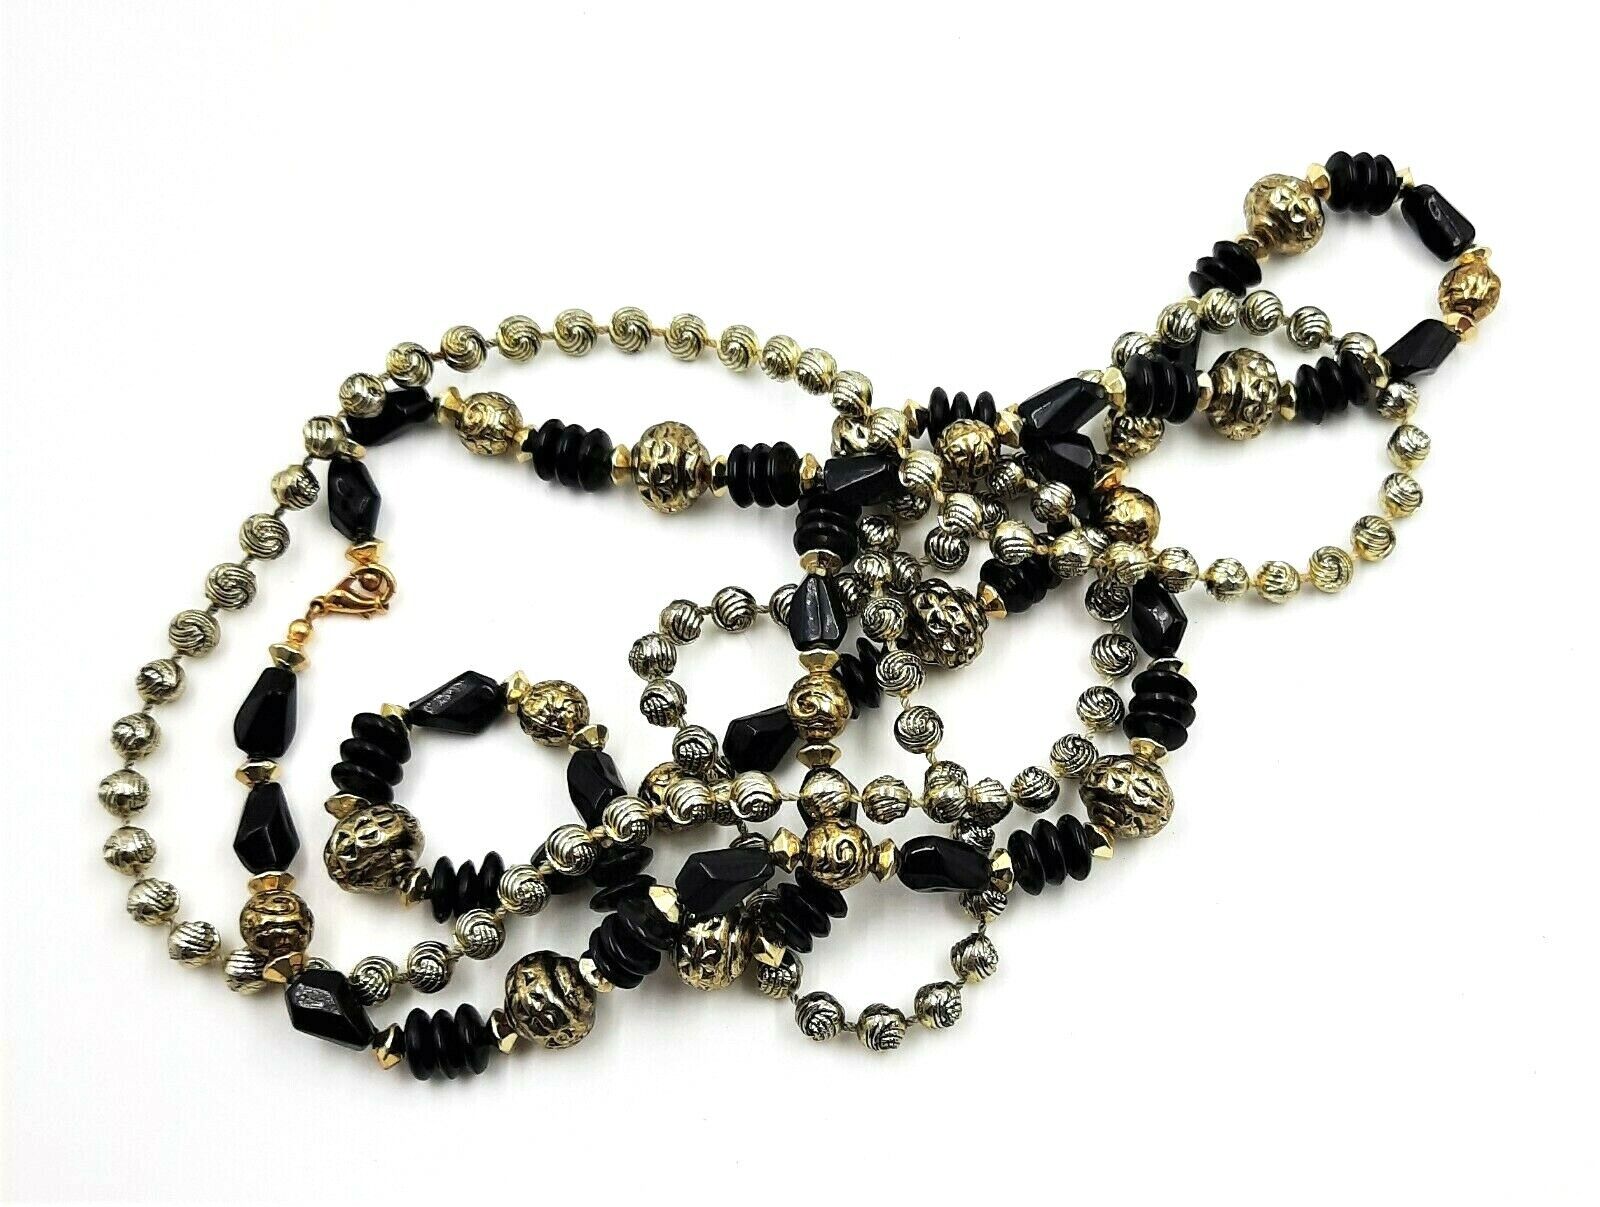 2 Black & Gold Beaded Vintage Necklaces Women's Fashion Costume Jewellery Unbranded Does Not Apply - фотография #2